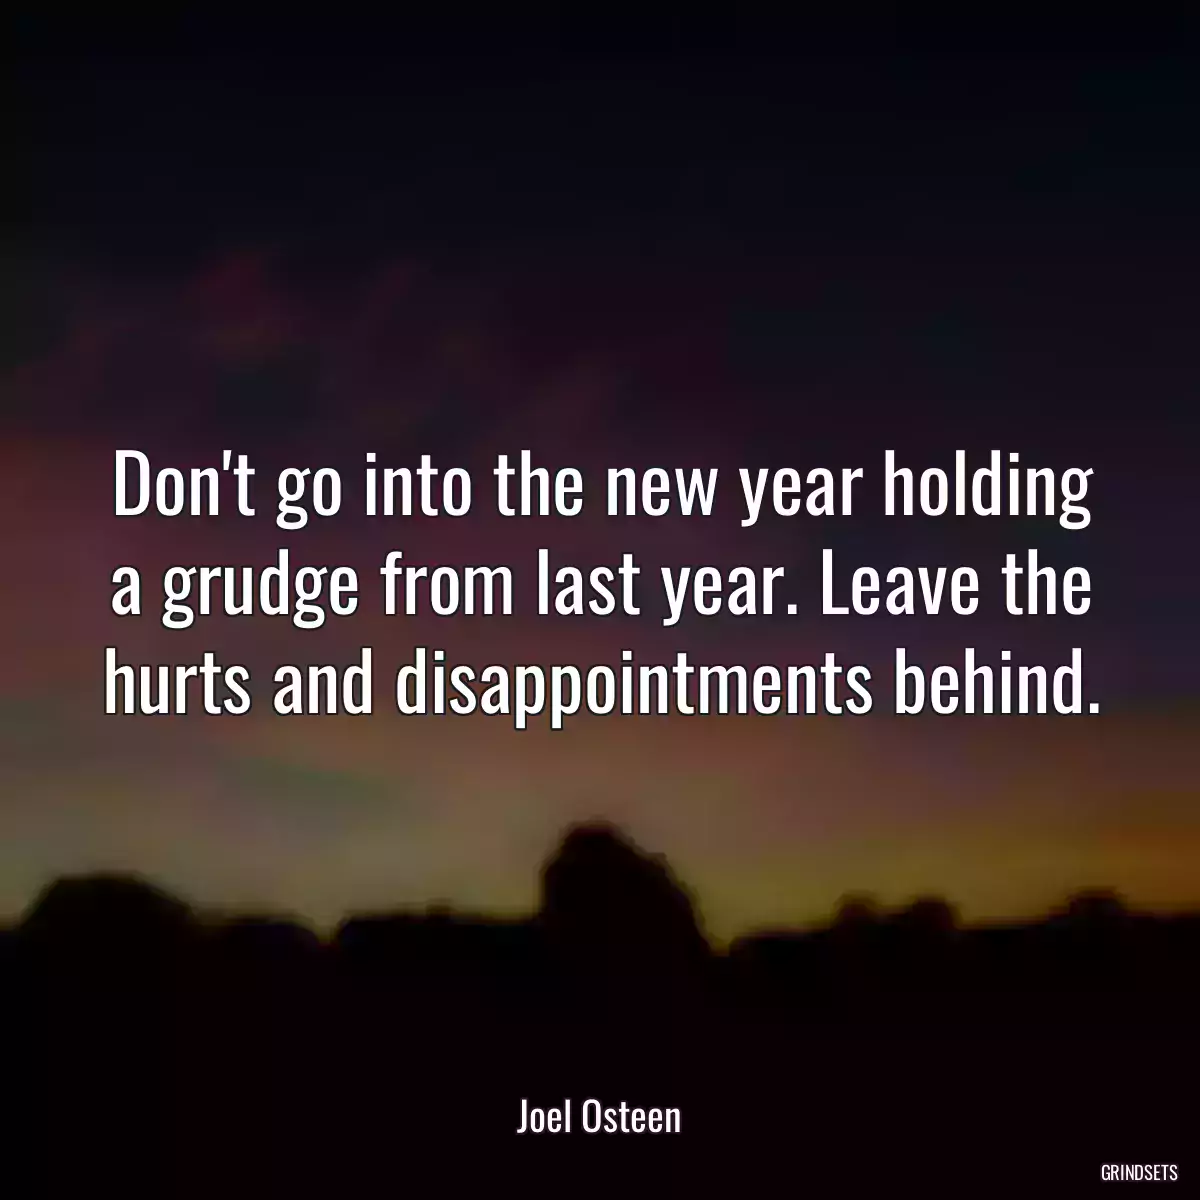 Don\'t go into the new year holding a grudge from last year. Leave the hurts and disappointments behind.